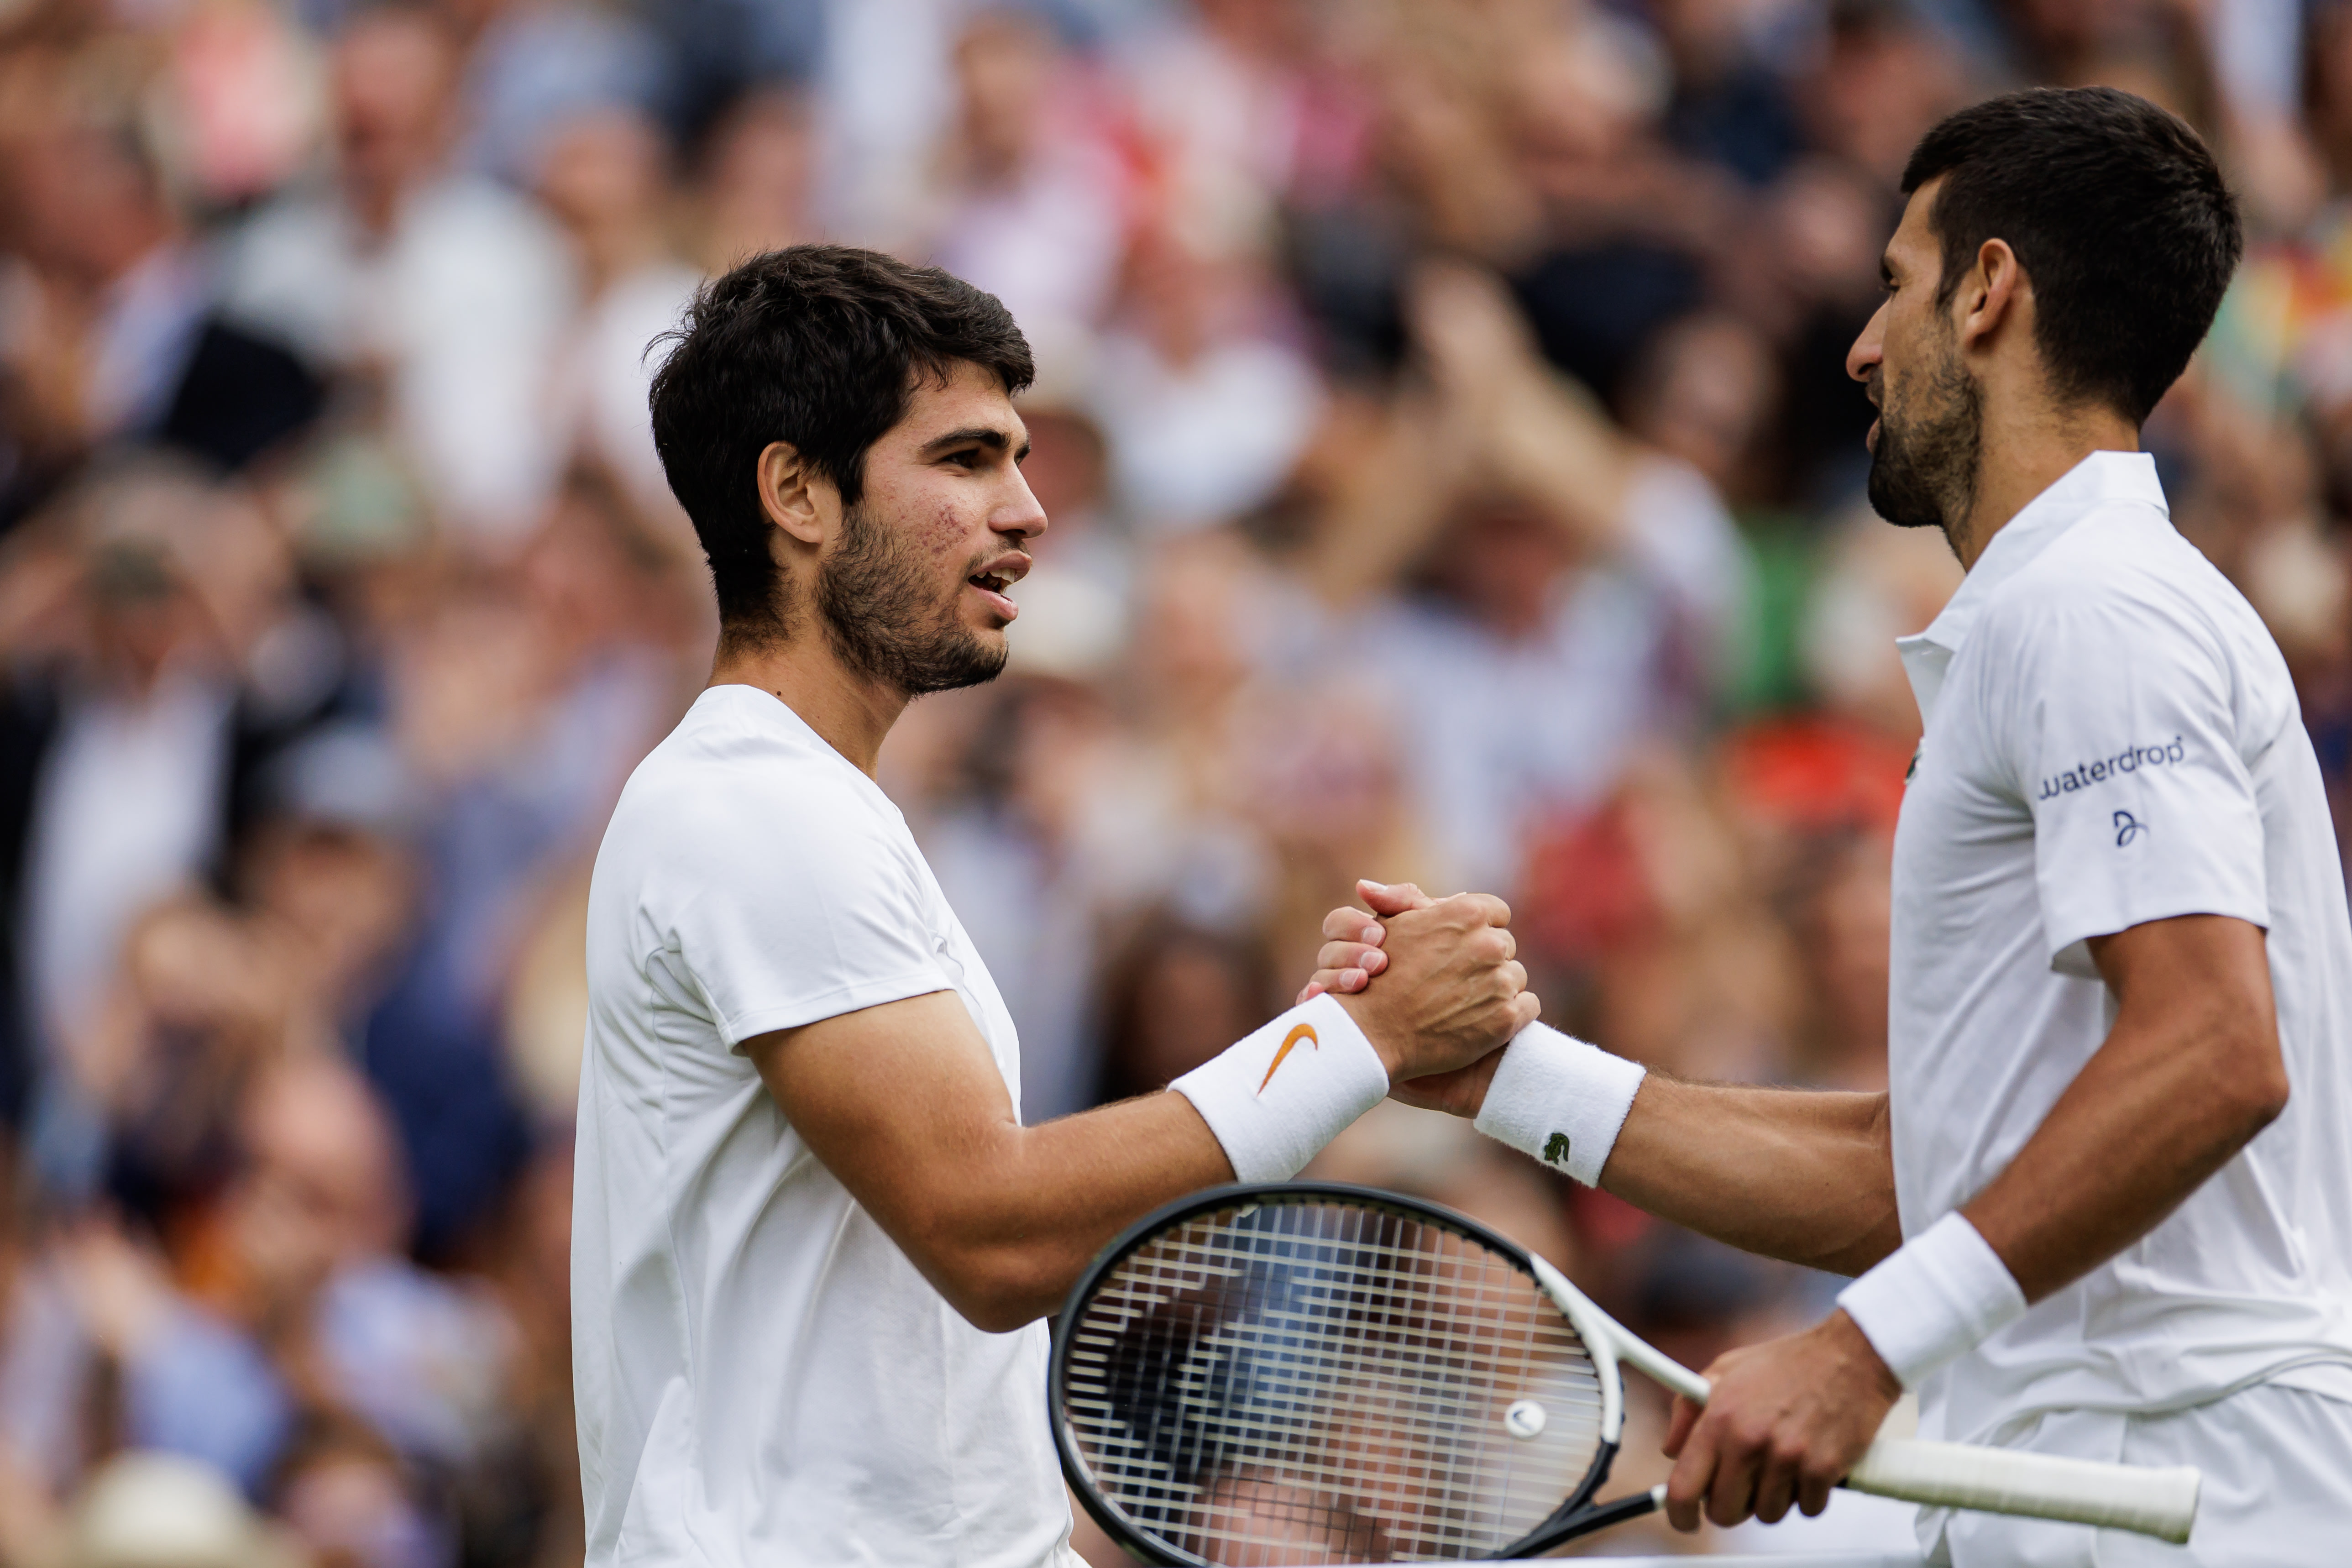 Lucky to witness so much greatness Praises pour in for Carlos Alcaraz and Novak Djokovic after Wimbledon thriller